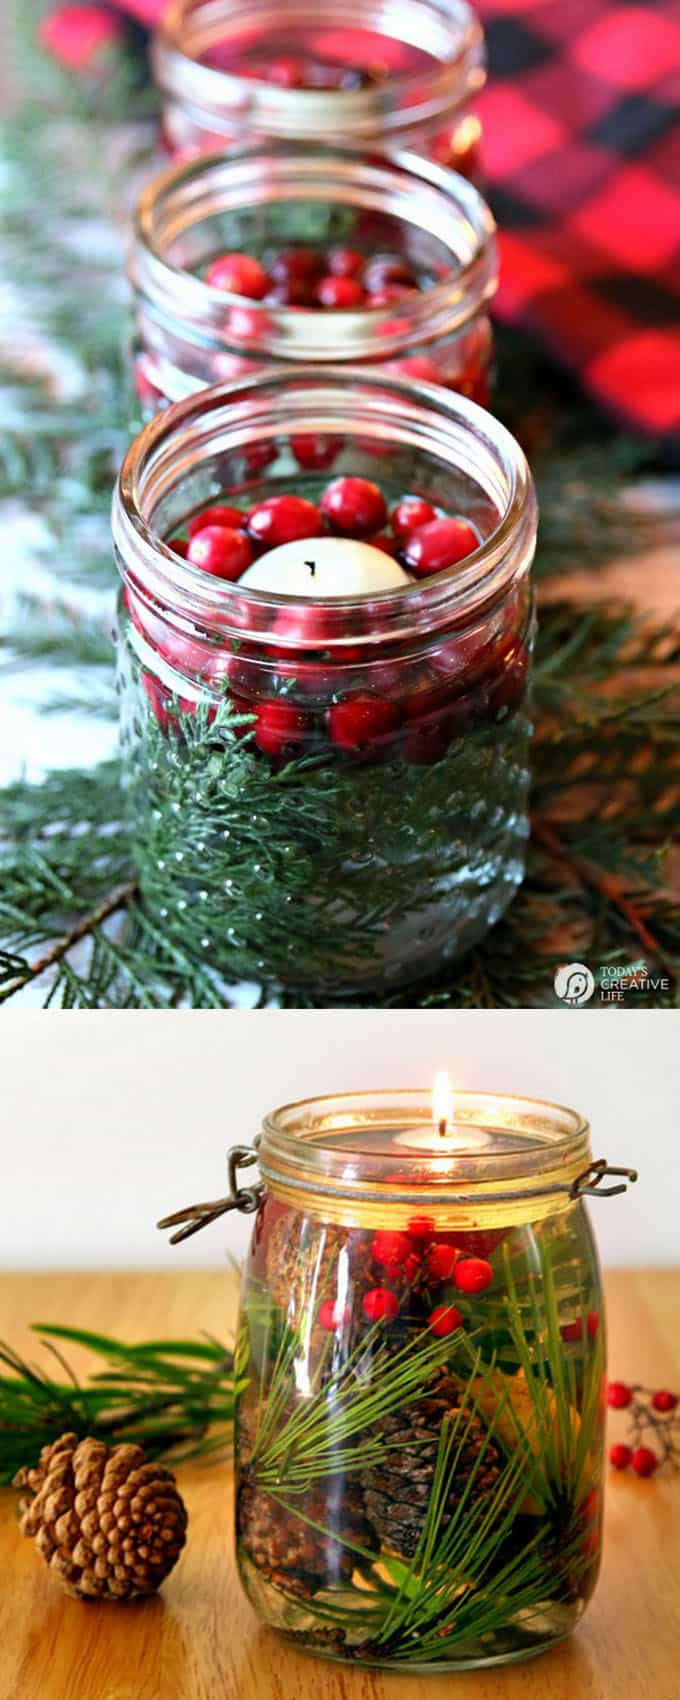 DIY Christmas Table Centerpieces
 27 Gorgeous DIY Thanksgiving & Christmas Table Decorations